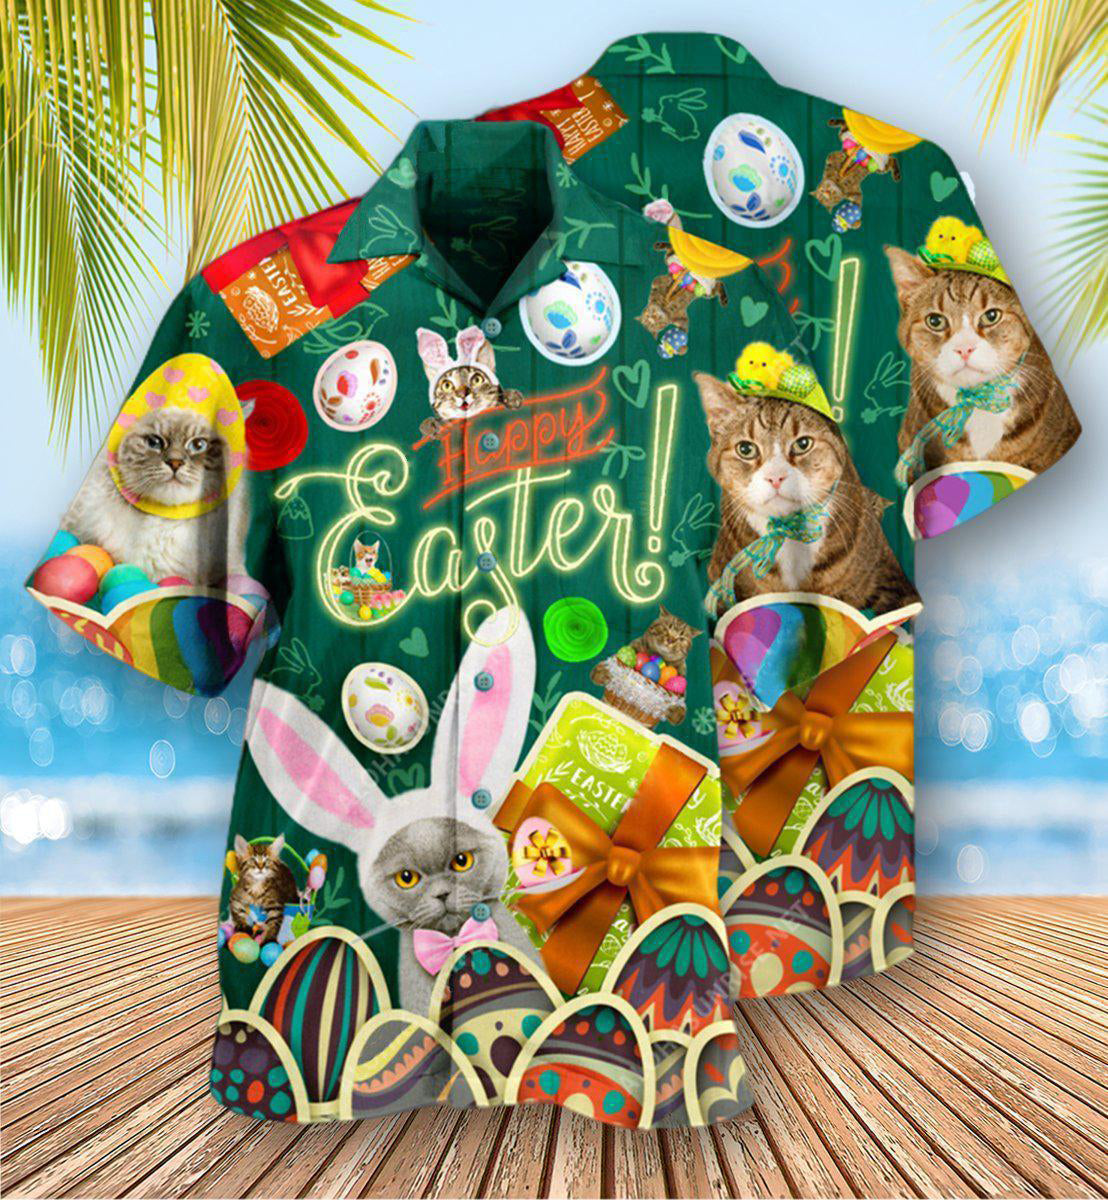 Cat Easter Blessings To You And Your Cats - Hawaiian Shirt - Owls Matrix LTD